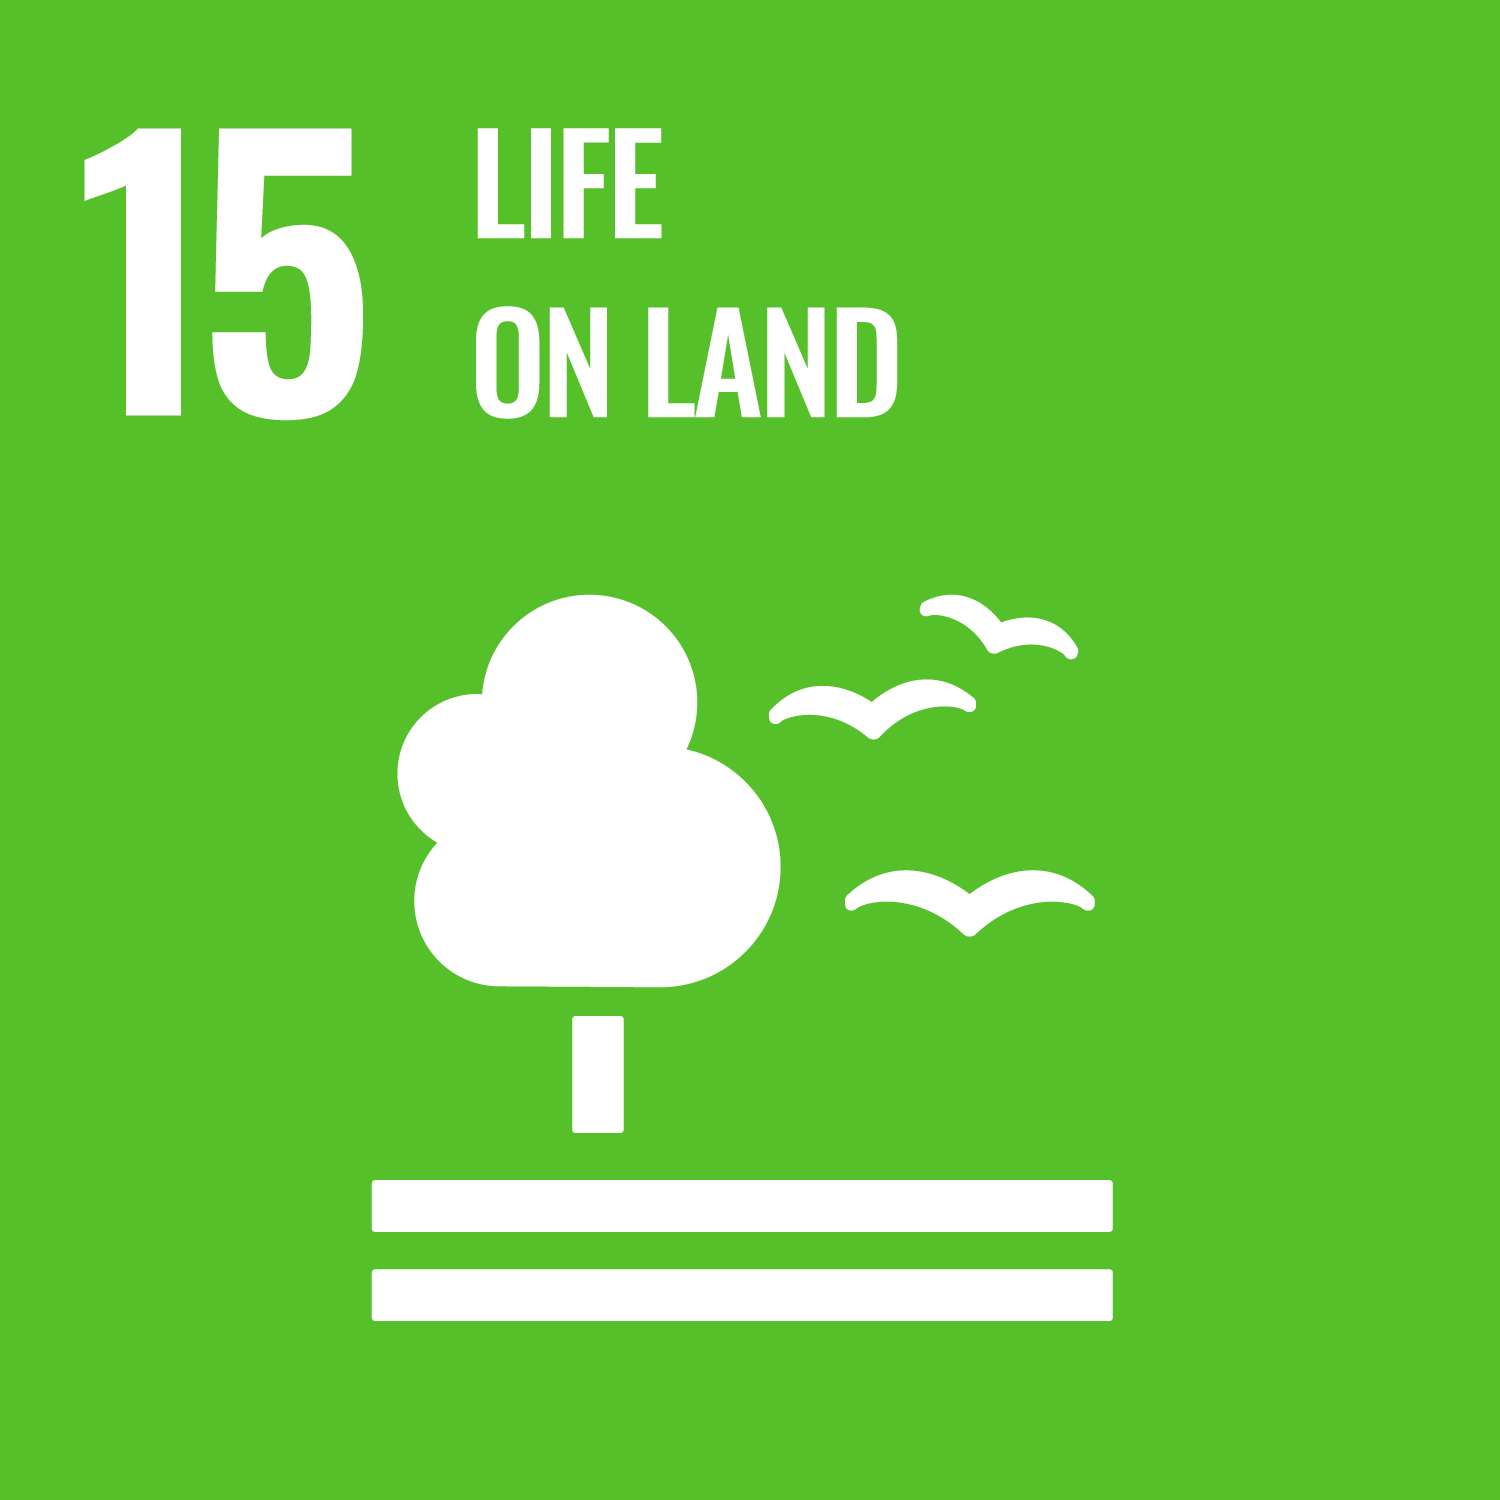 SDG Goal 15, Life on Land. Green background with white images of a tree and birds.